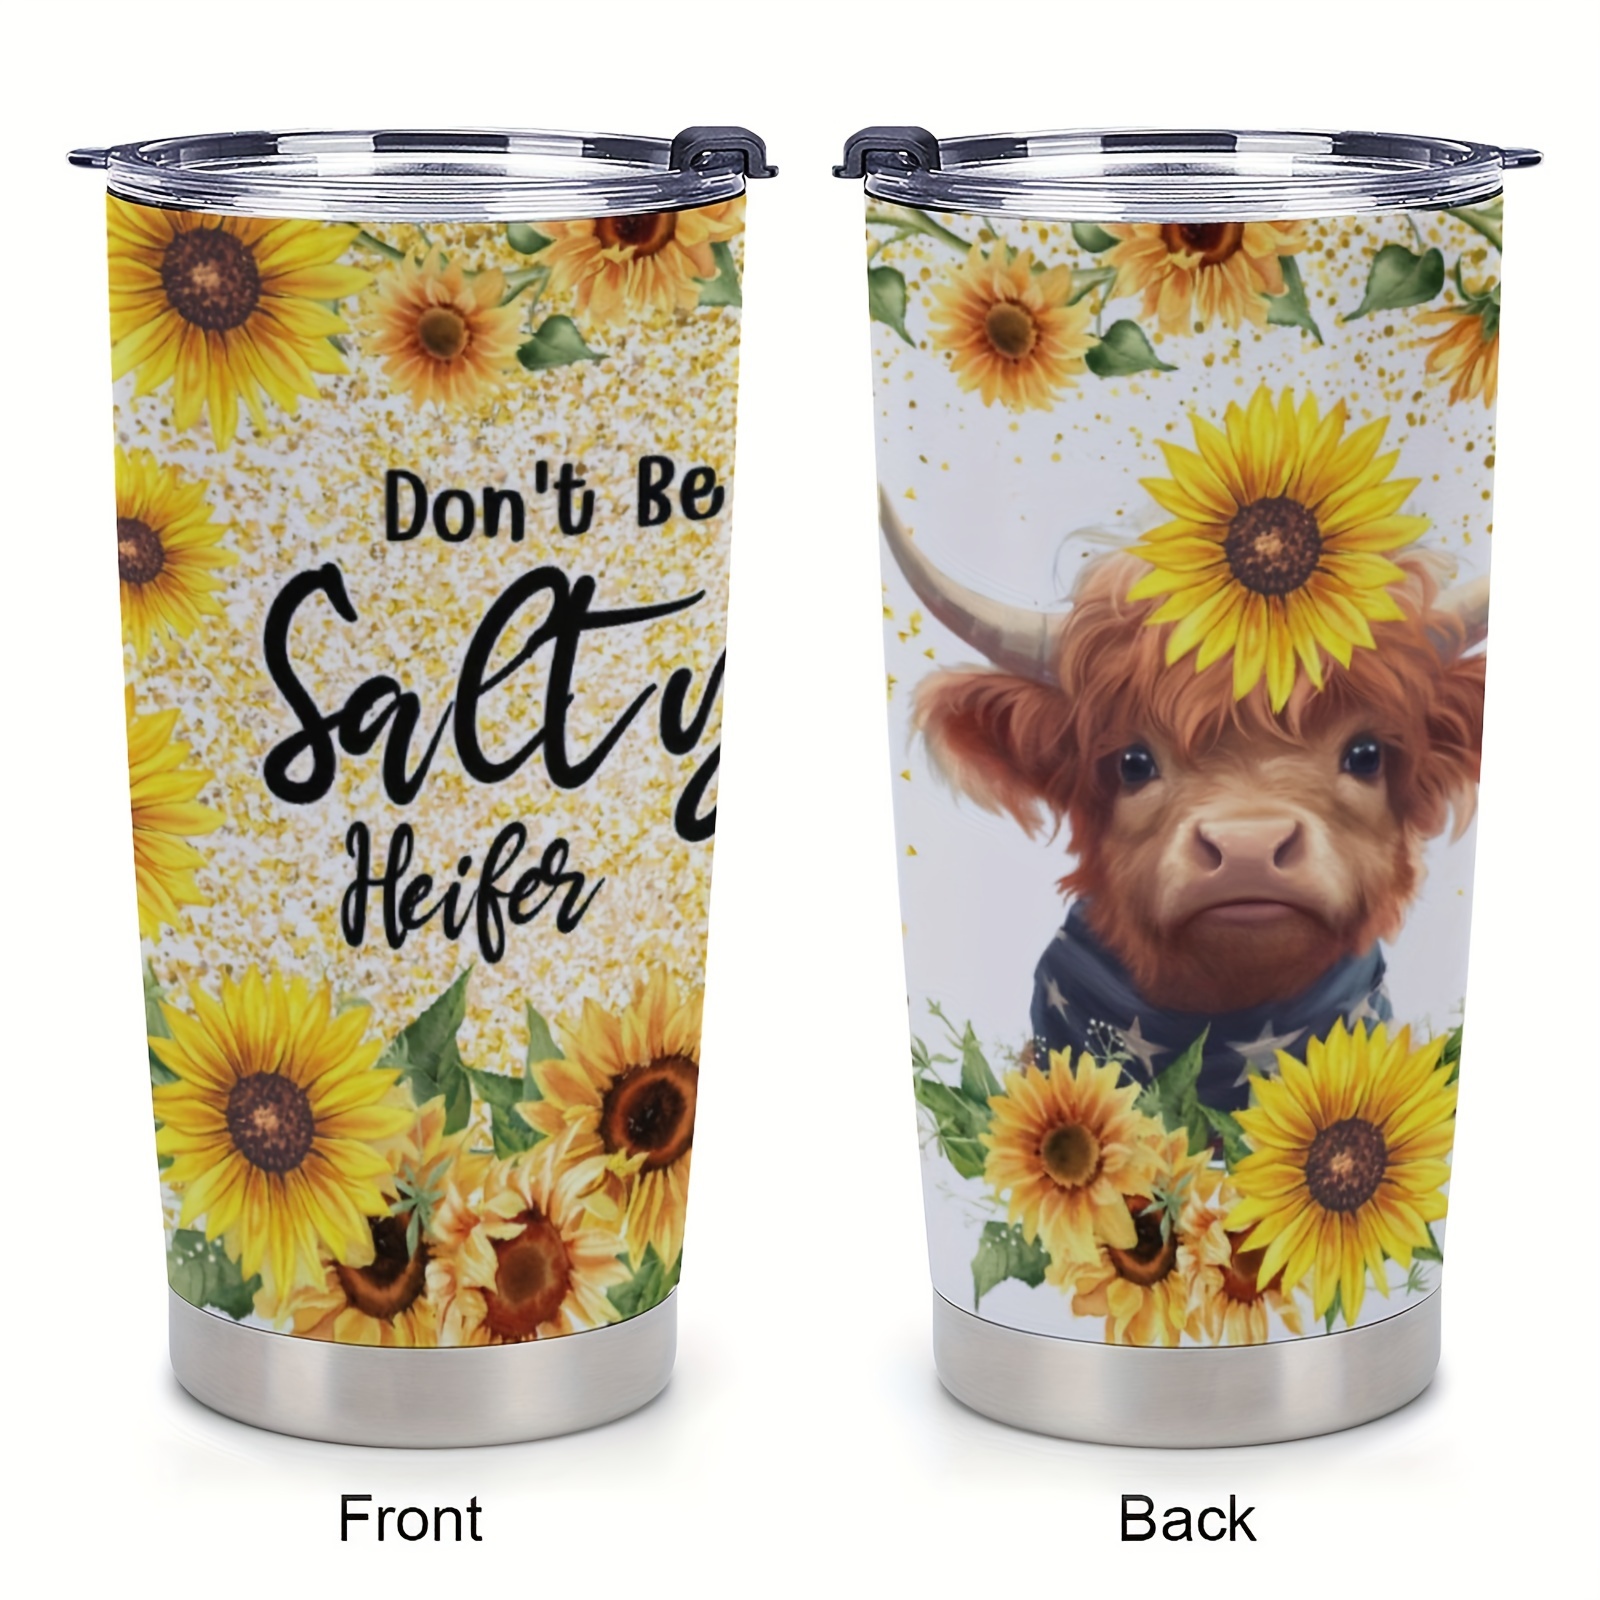 

1pc 20oz Cow Gifts Cup, Coffee Mugs For Friend, A Lovely Heifer, Insulated Travel Coffee Mug With Lid